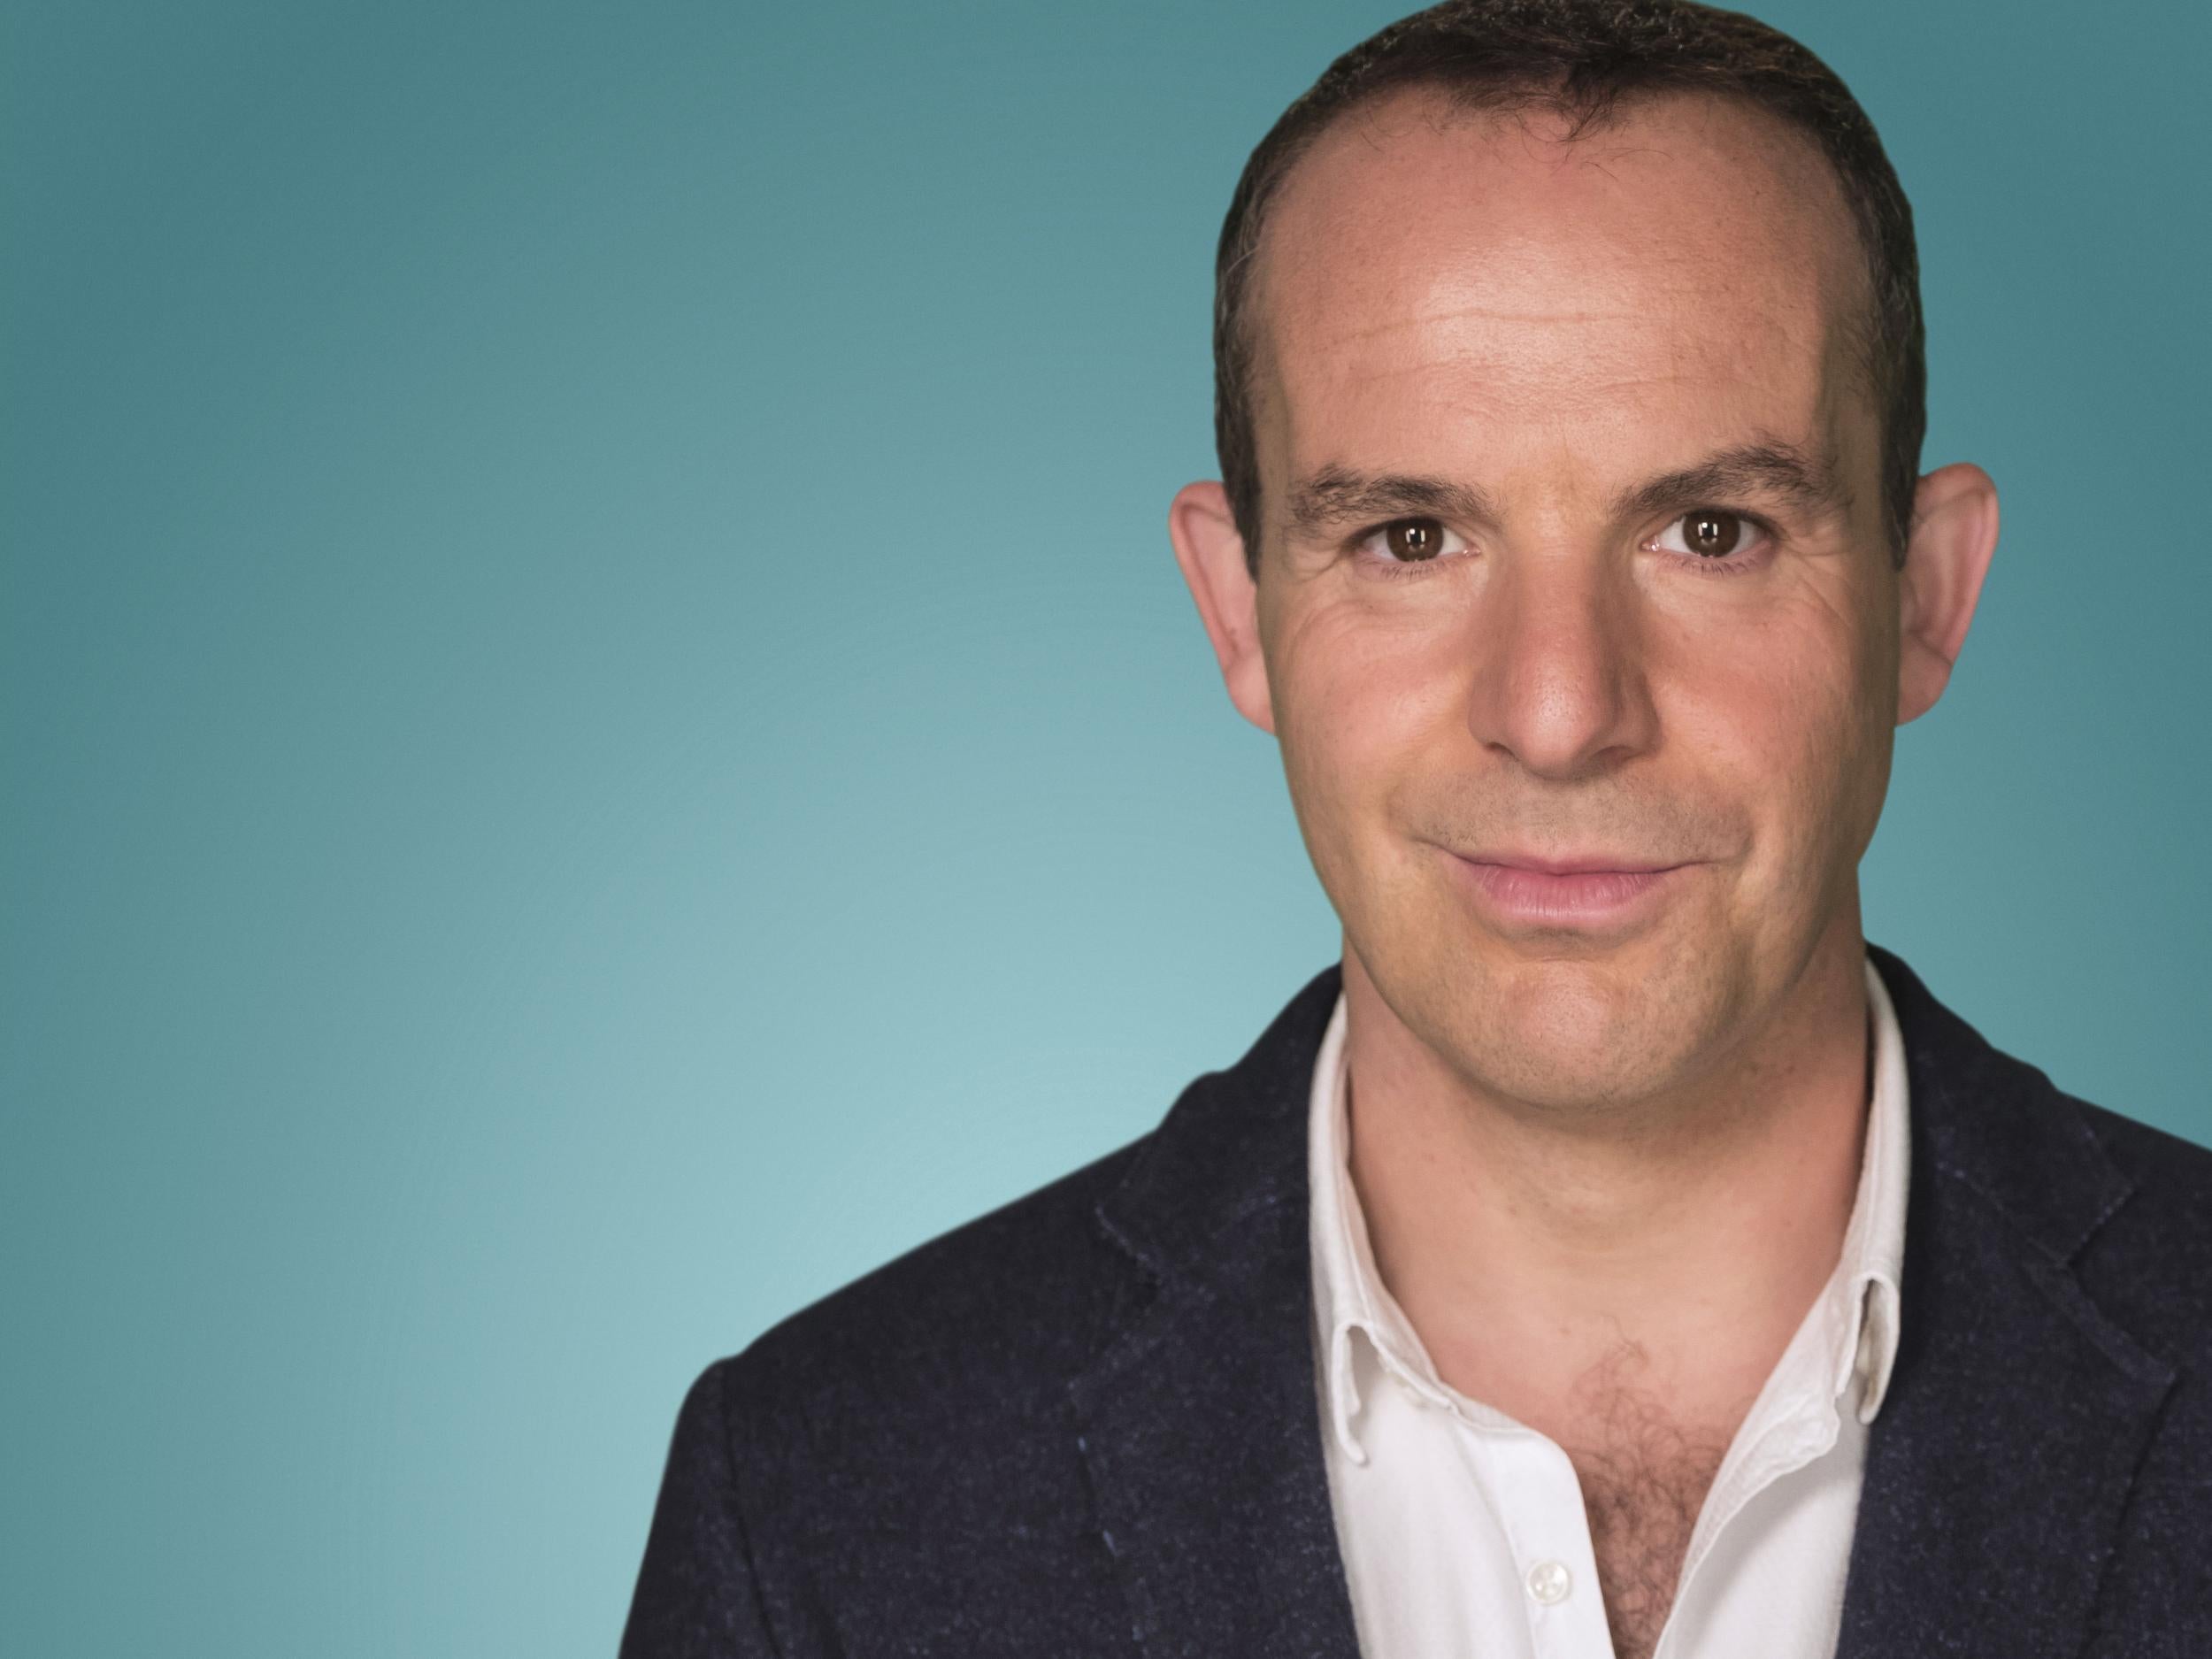 Martin Lewis, the renowned consumer campaigner, is taking Facebook to court